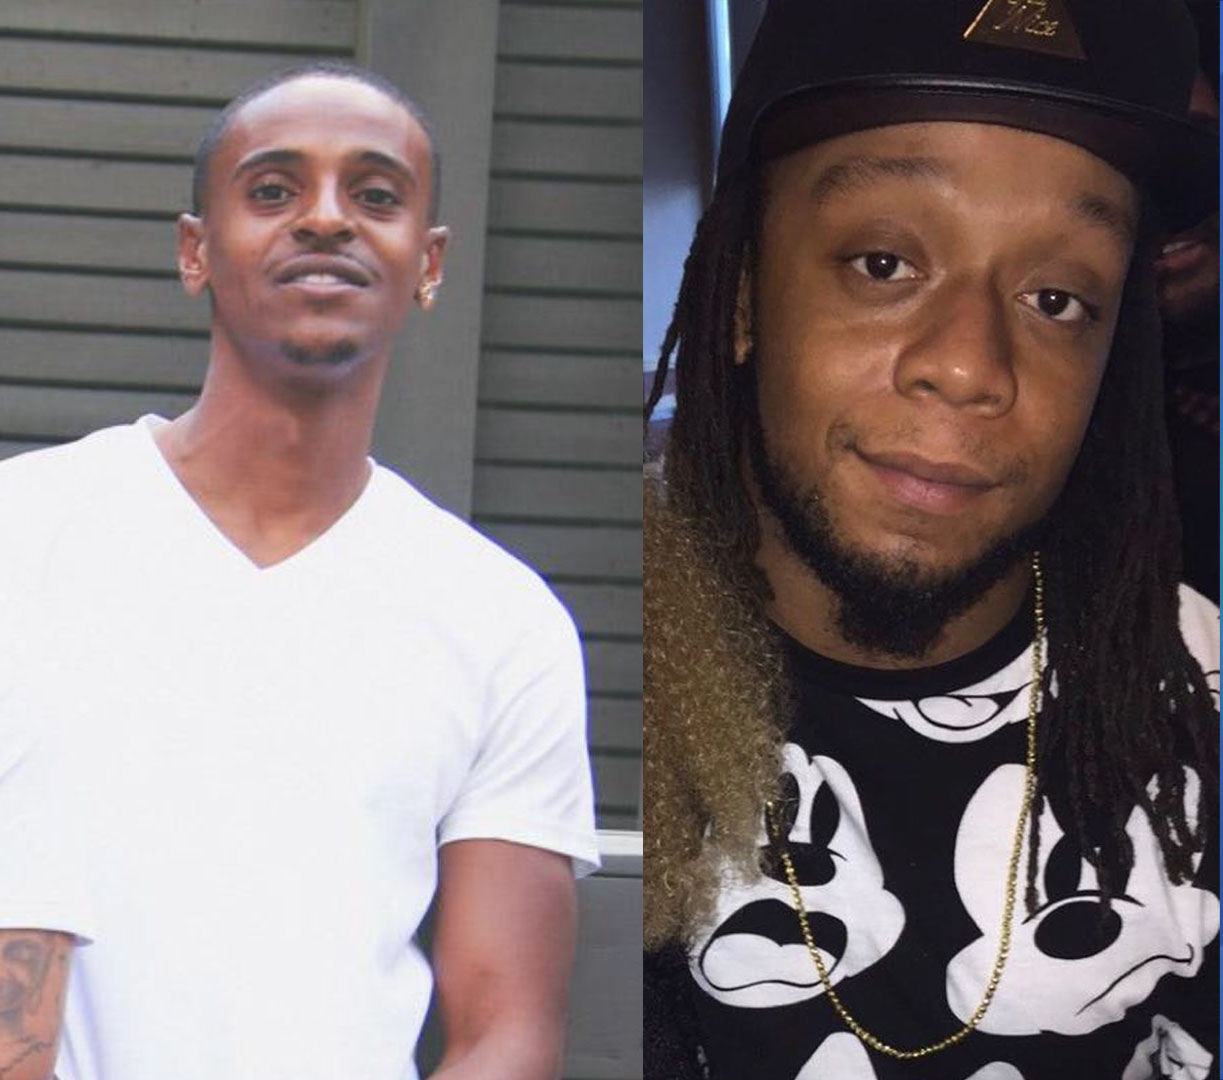 Rinaldo Cole and Dwayne Campbell identified as two victims of backyard shooting